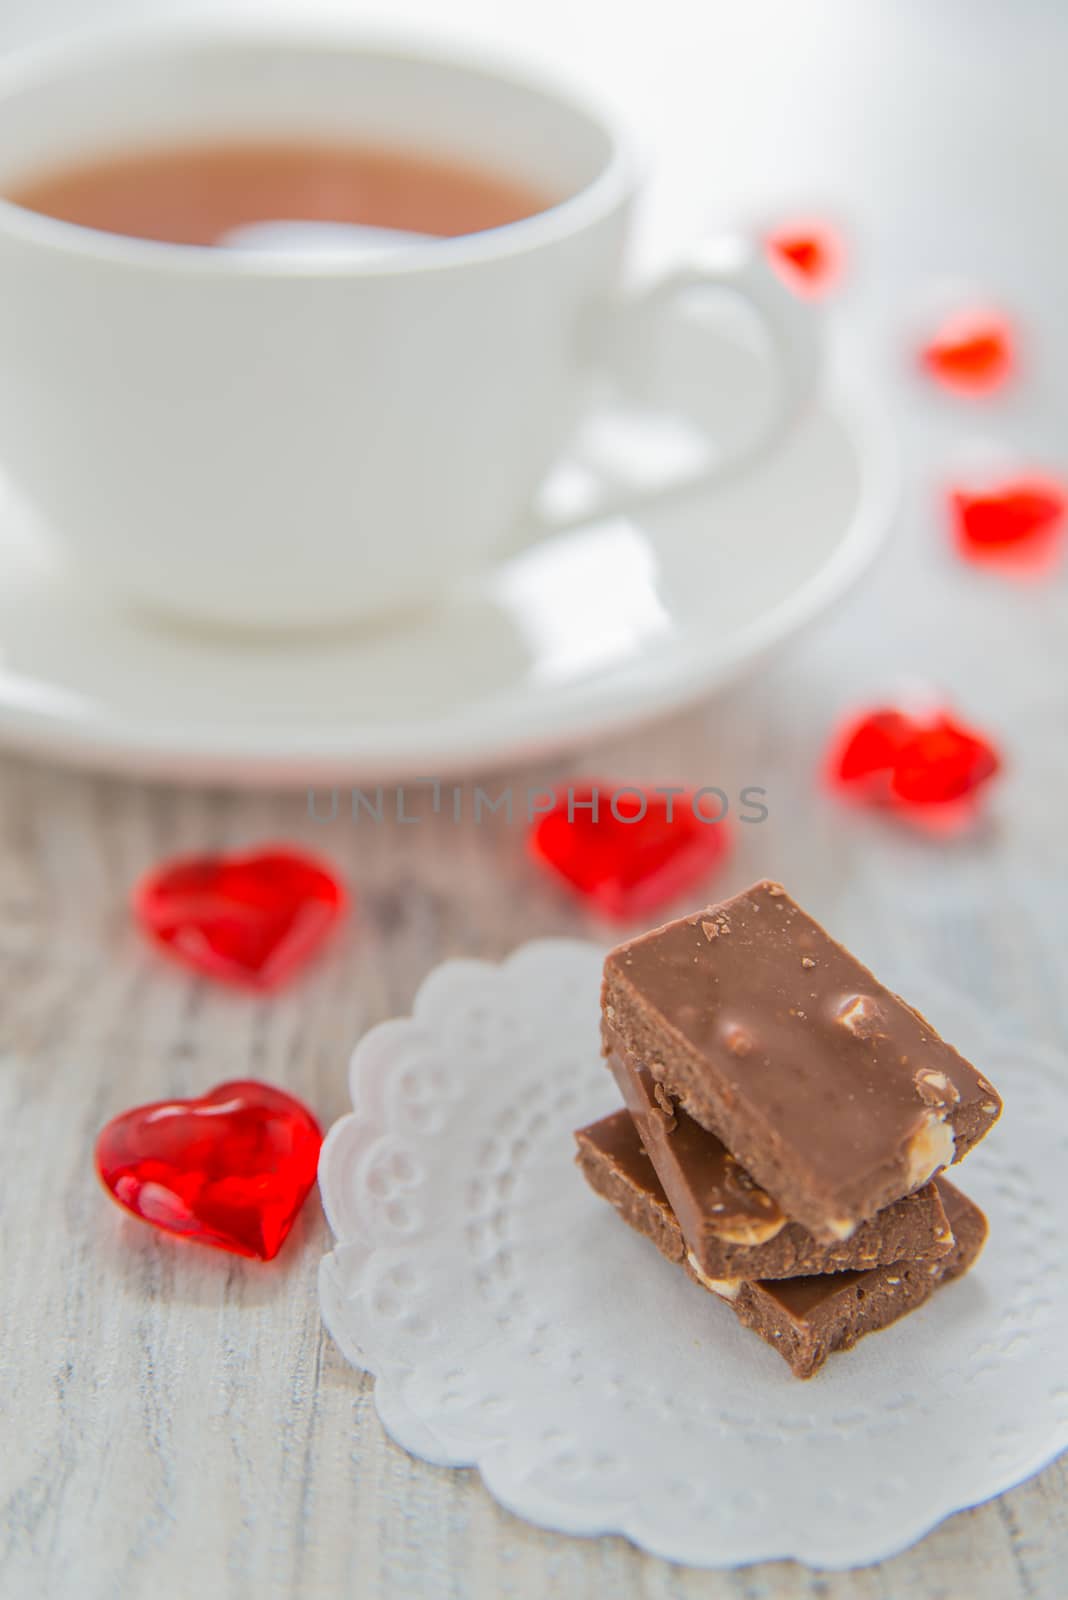 Chocolate and tea on St. Valentine day by Linaga